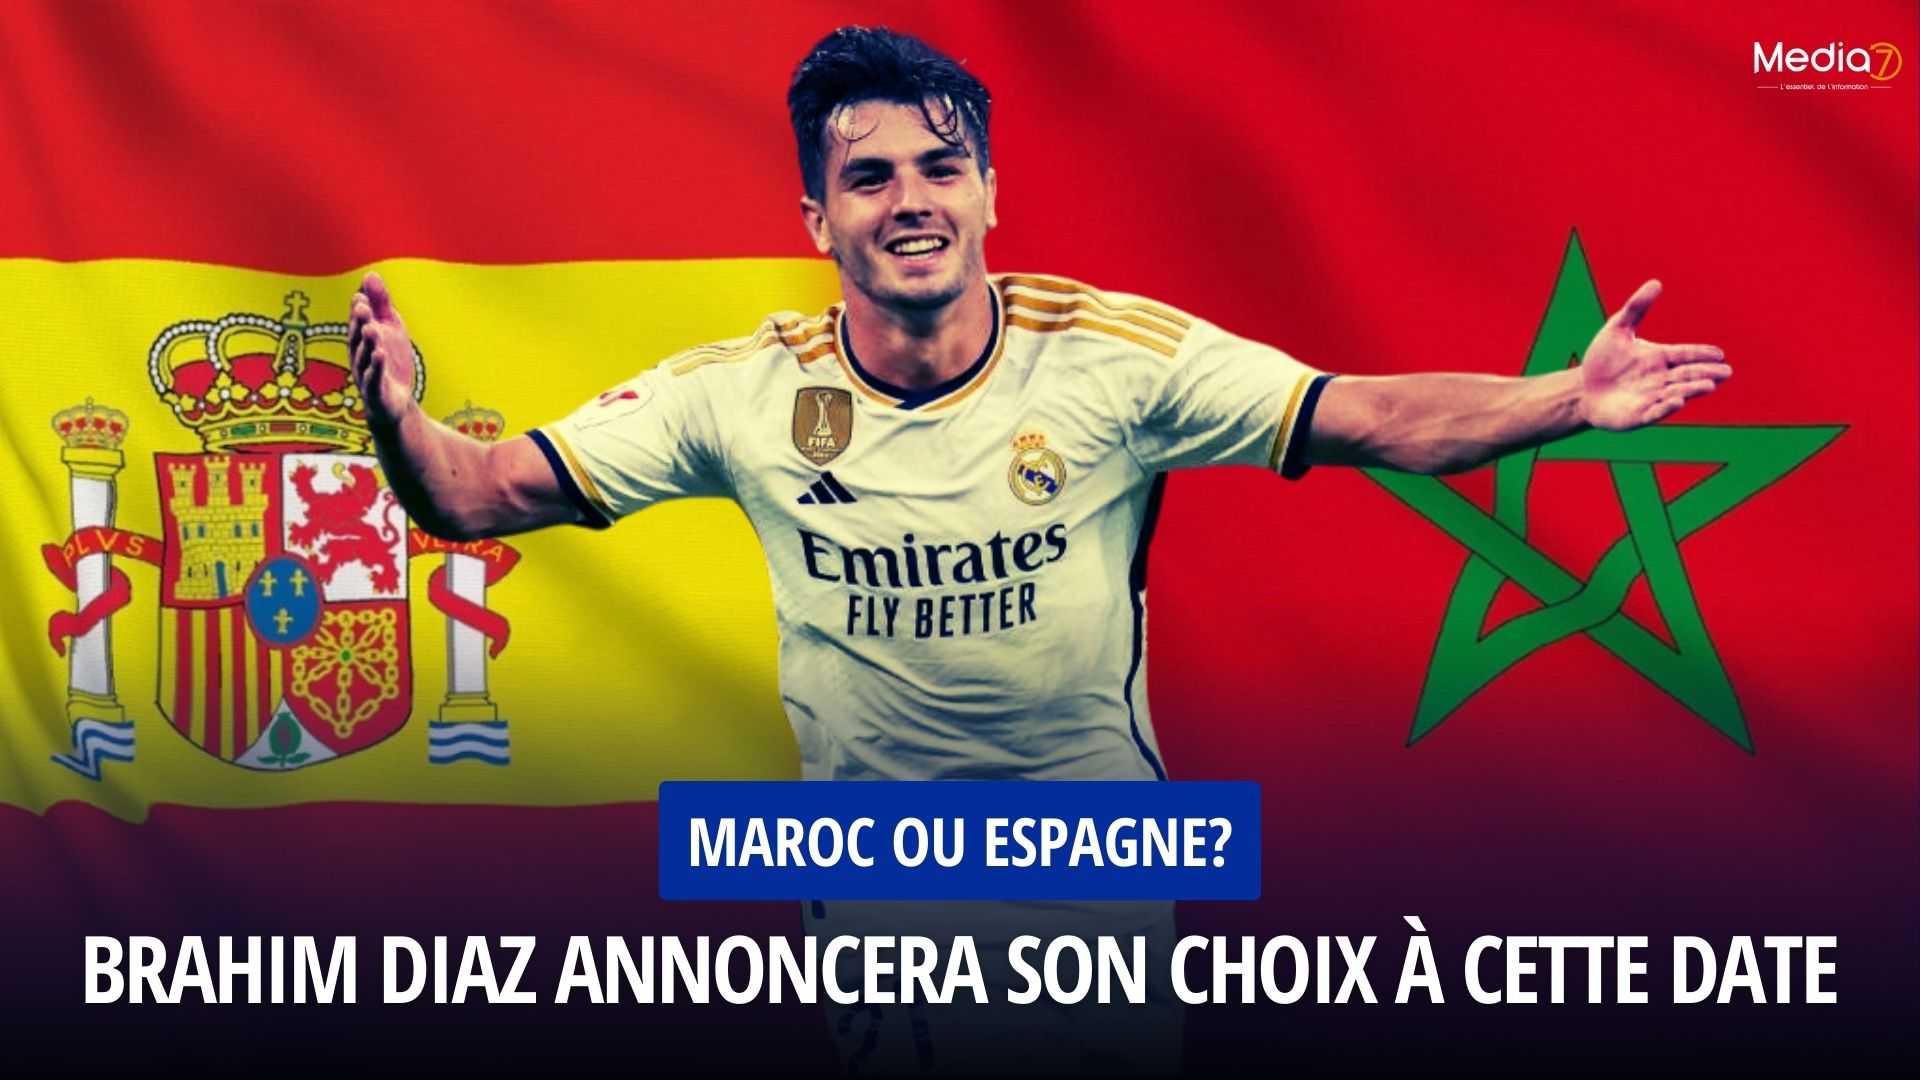 Brahim Diaz will announce his choice between Spain and Morocco on this date - Media7